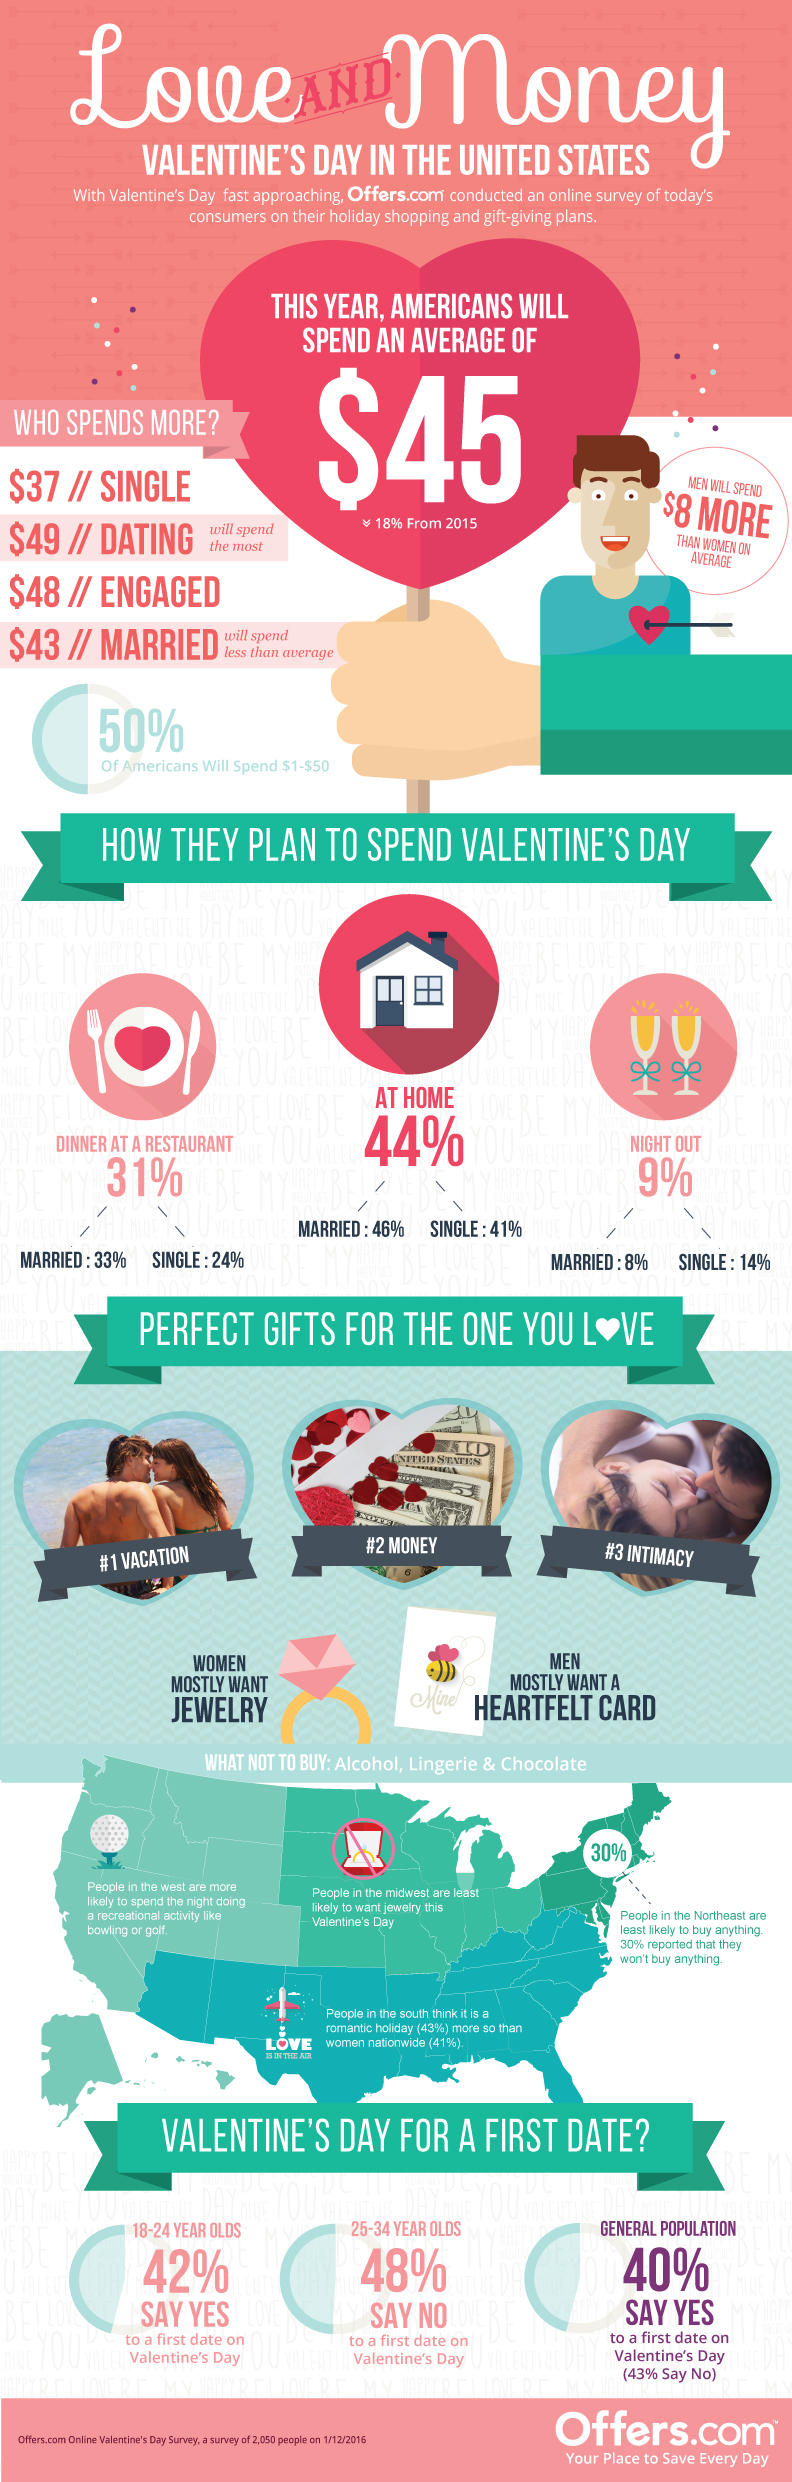 2016 Valentine's Day Shopping and Gift Trends